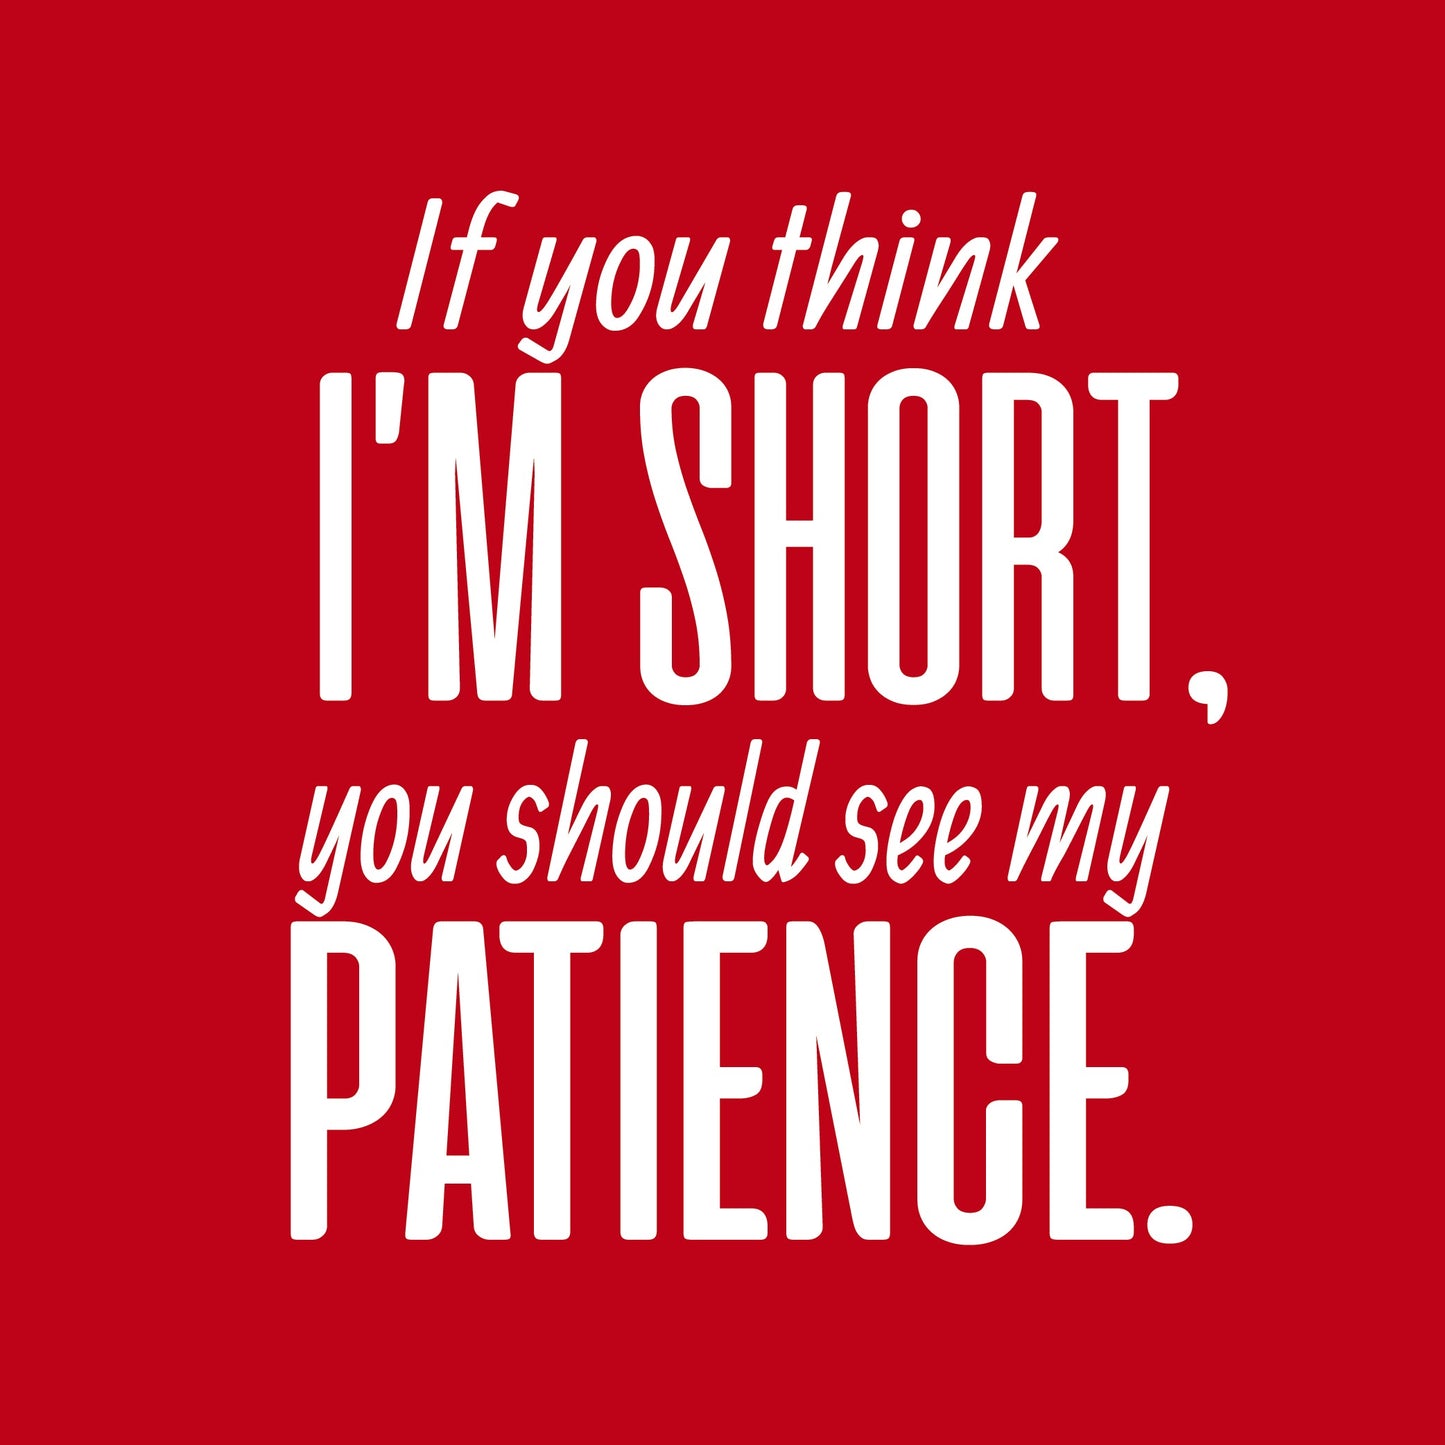 If you think I am short